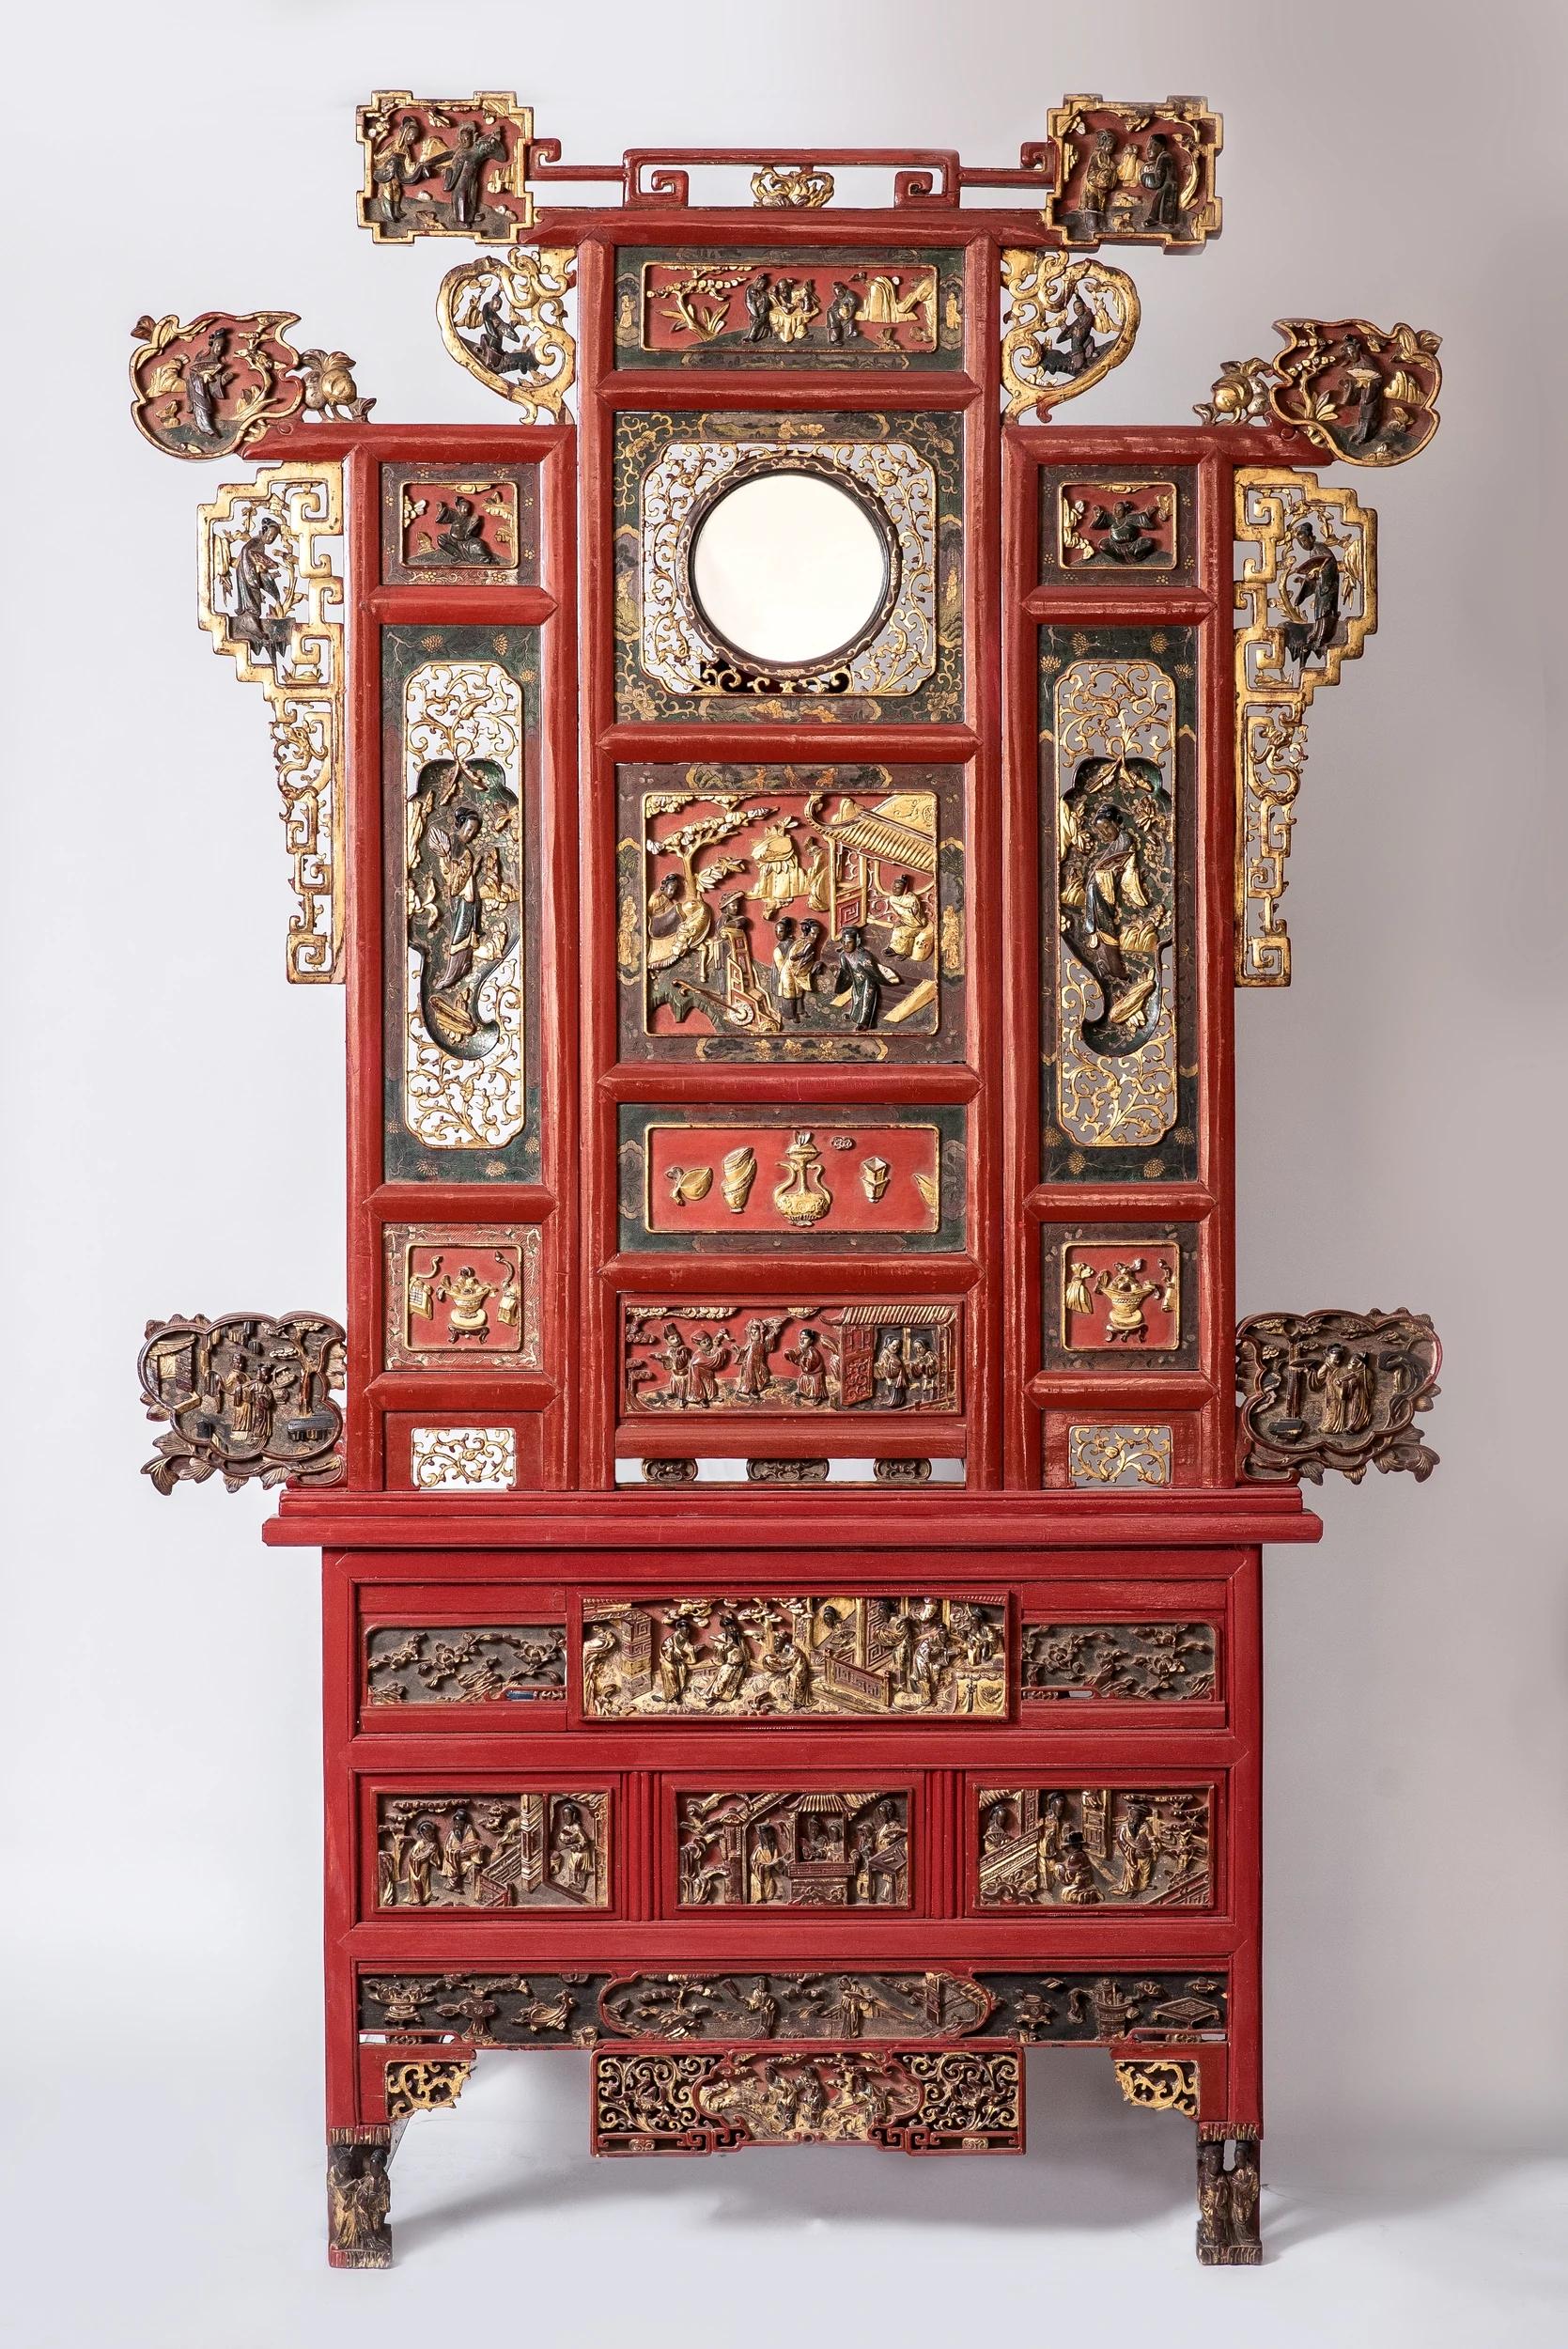 Two large panels of a Chinese wedding bed, richly carved with figures, festive scenes, gifts and symbols of prosperity.
Carved wood, red lacquer, gold leaf and black lacquer. China, late 19th century.

The two panels are not quite the same